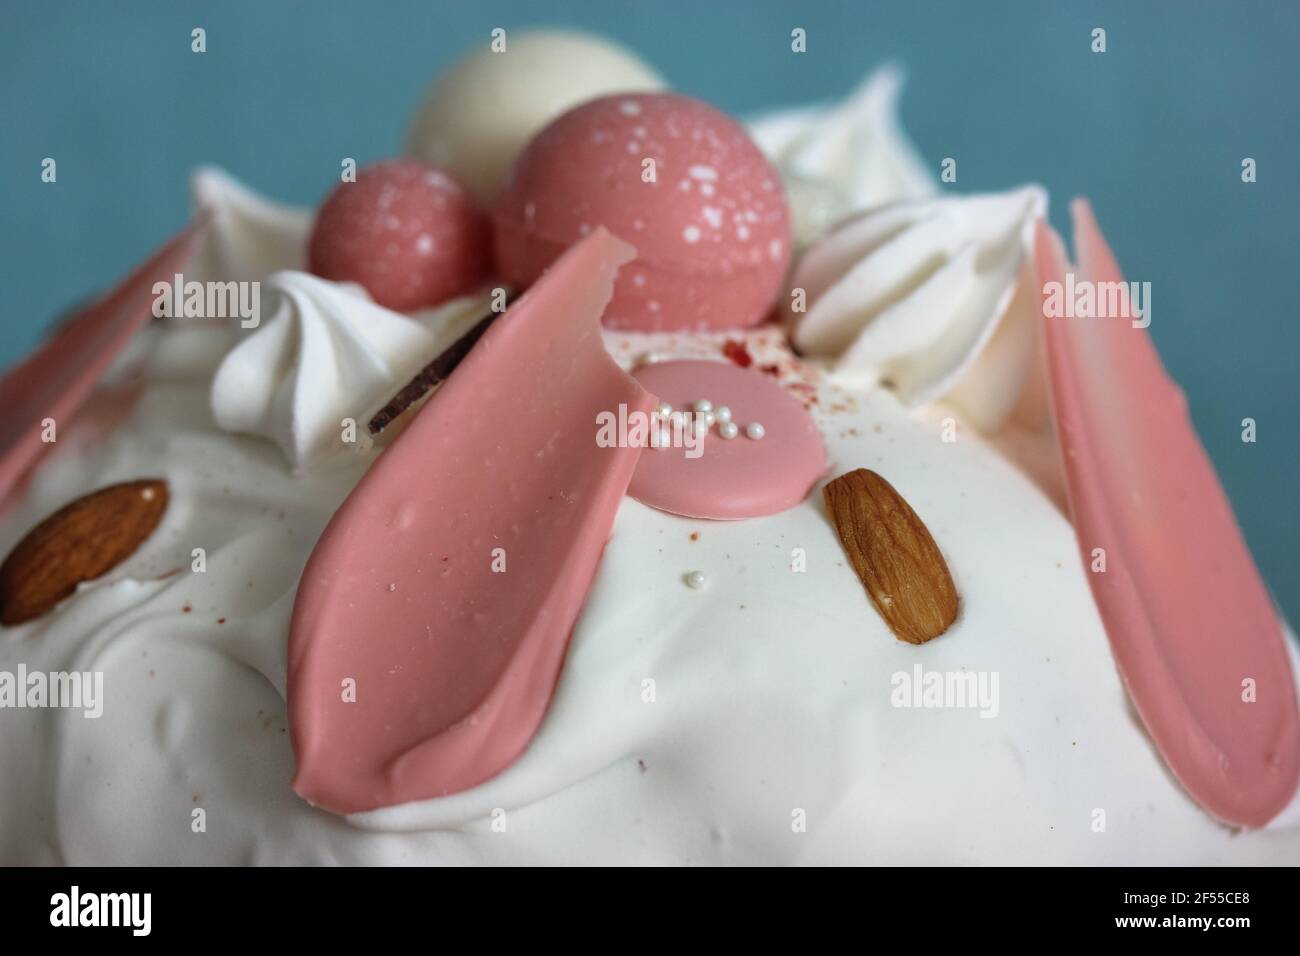 Easter cake decorated with white icing, meringue, pink decorative chocolate balls, nuts. Homemade Easter bread top view on blue background. A recipe f Stock Photo